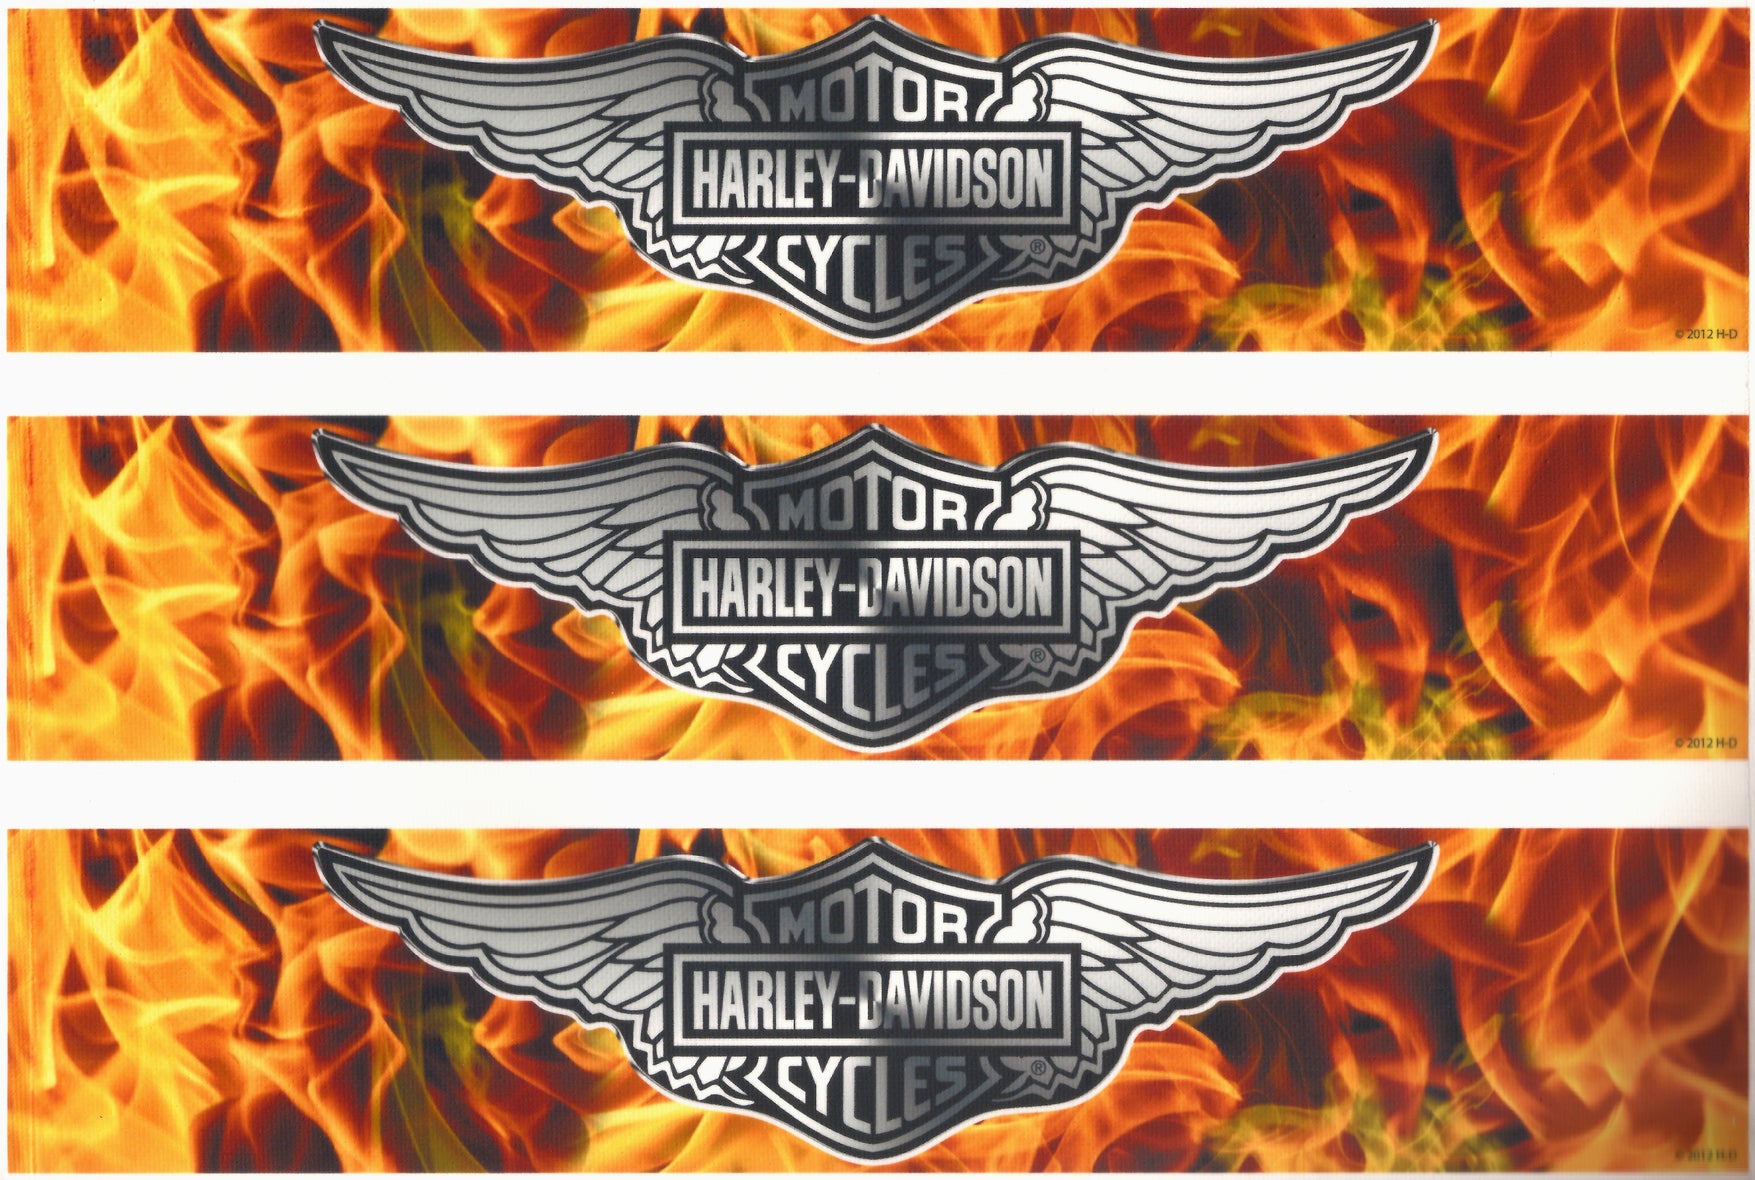 Motor Cycles Harley Davidson Logo Fire Background Edible Cake Topper Image Strips ABPID07165